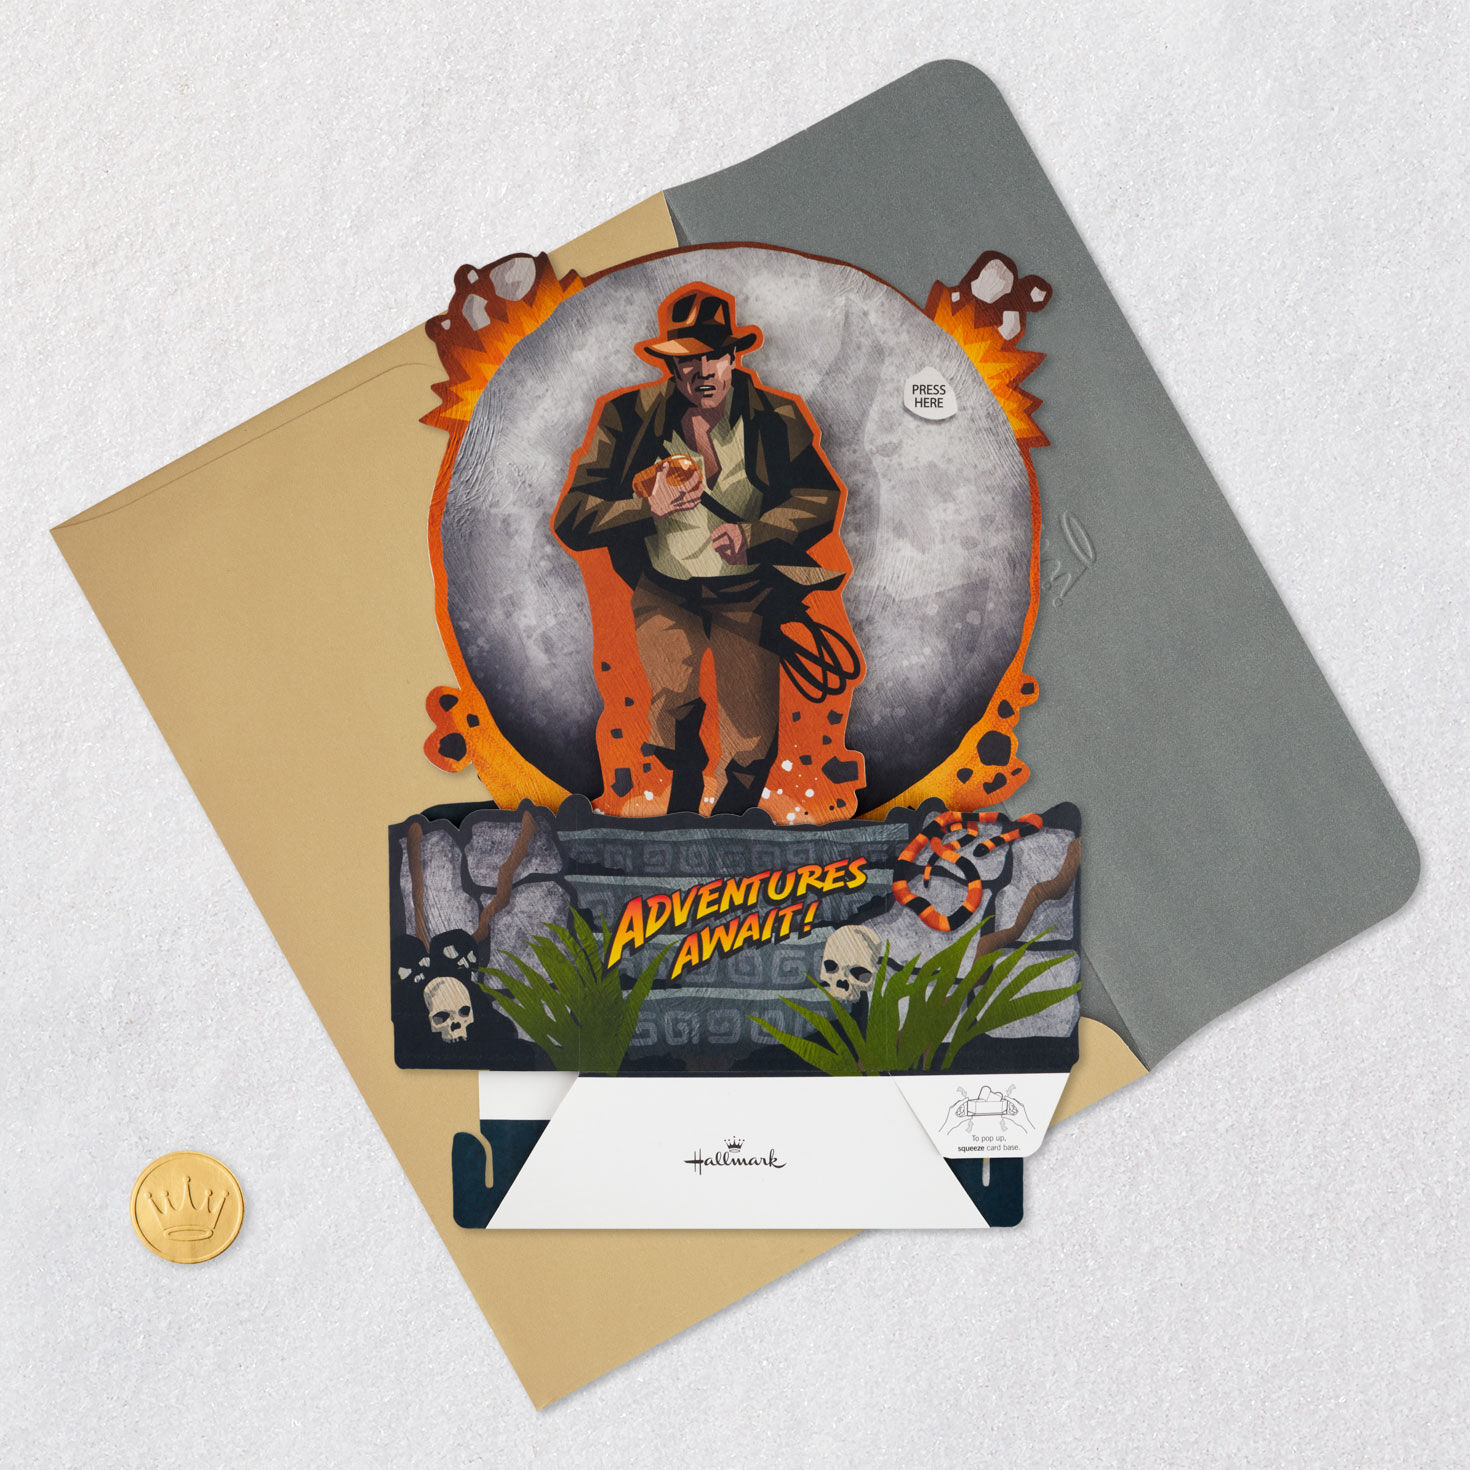 Indiana Jones™ Adventure Awaits Today Musical 3D Pop-Up Card With Light for only USD 9.99 | Hallmark